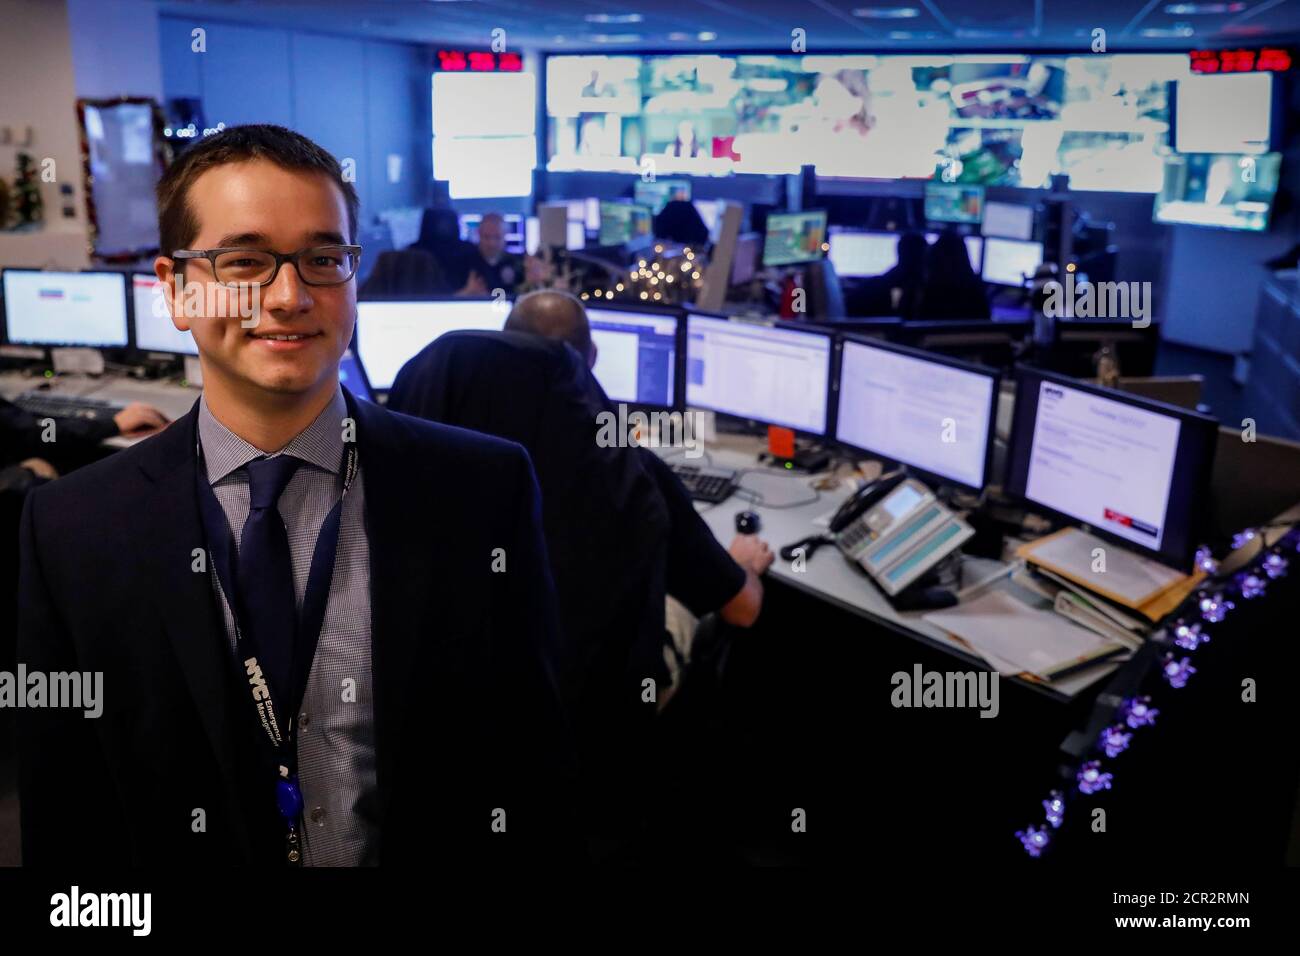 Eliot Calhoun, the Chemical, Biological, Radiological, Nuclear, and Explosives (CBRNE) Planner for NYC Emergency Management, poses in the operations center at the Emergency Management Headquarters in the Brooklyn borough of New York, U.S., December 7, 2017. Picture taken December 7, 2017.    REUTERS/Brendan McDermid Stock Photo